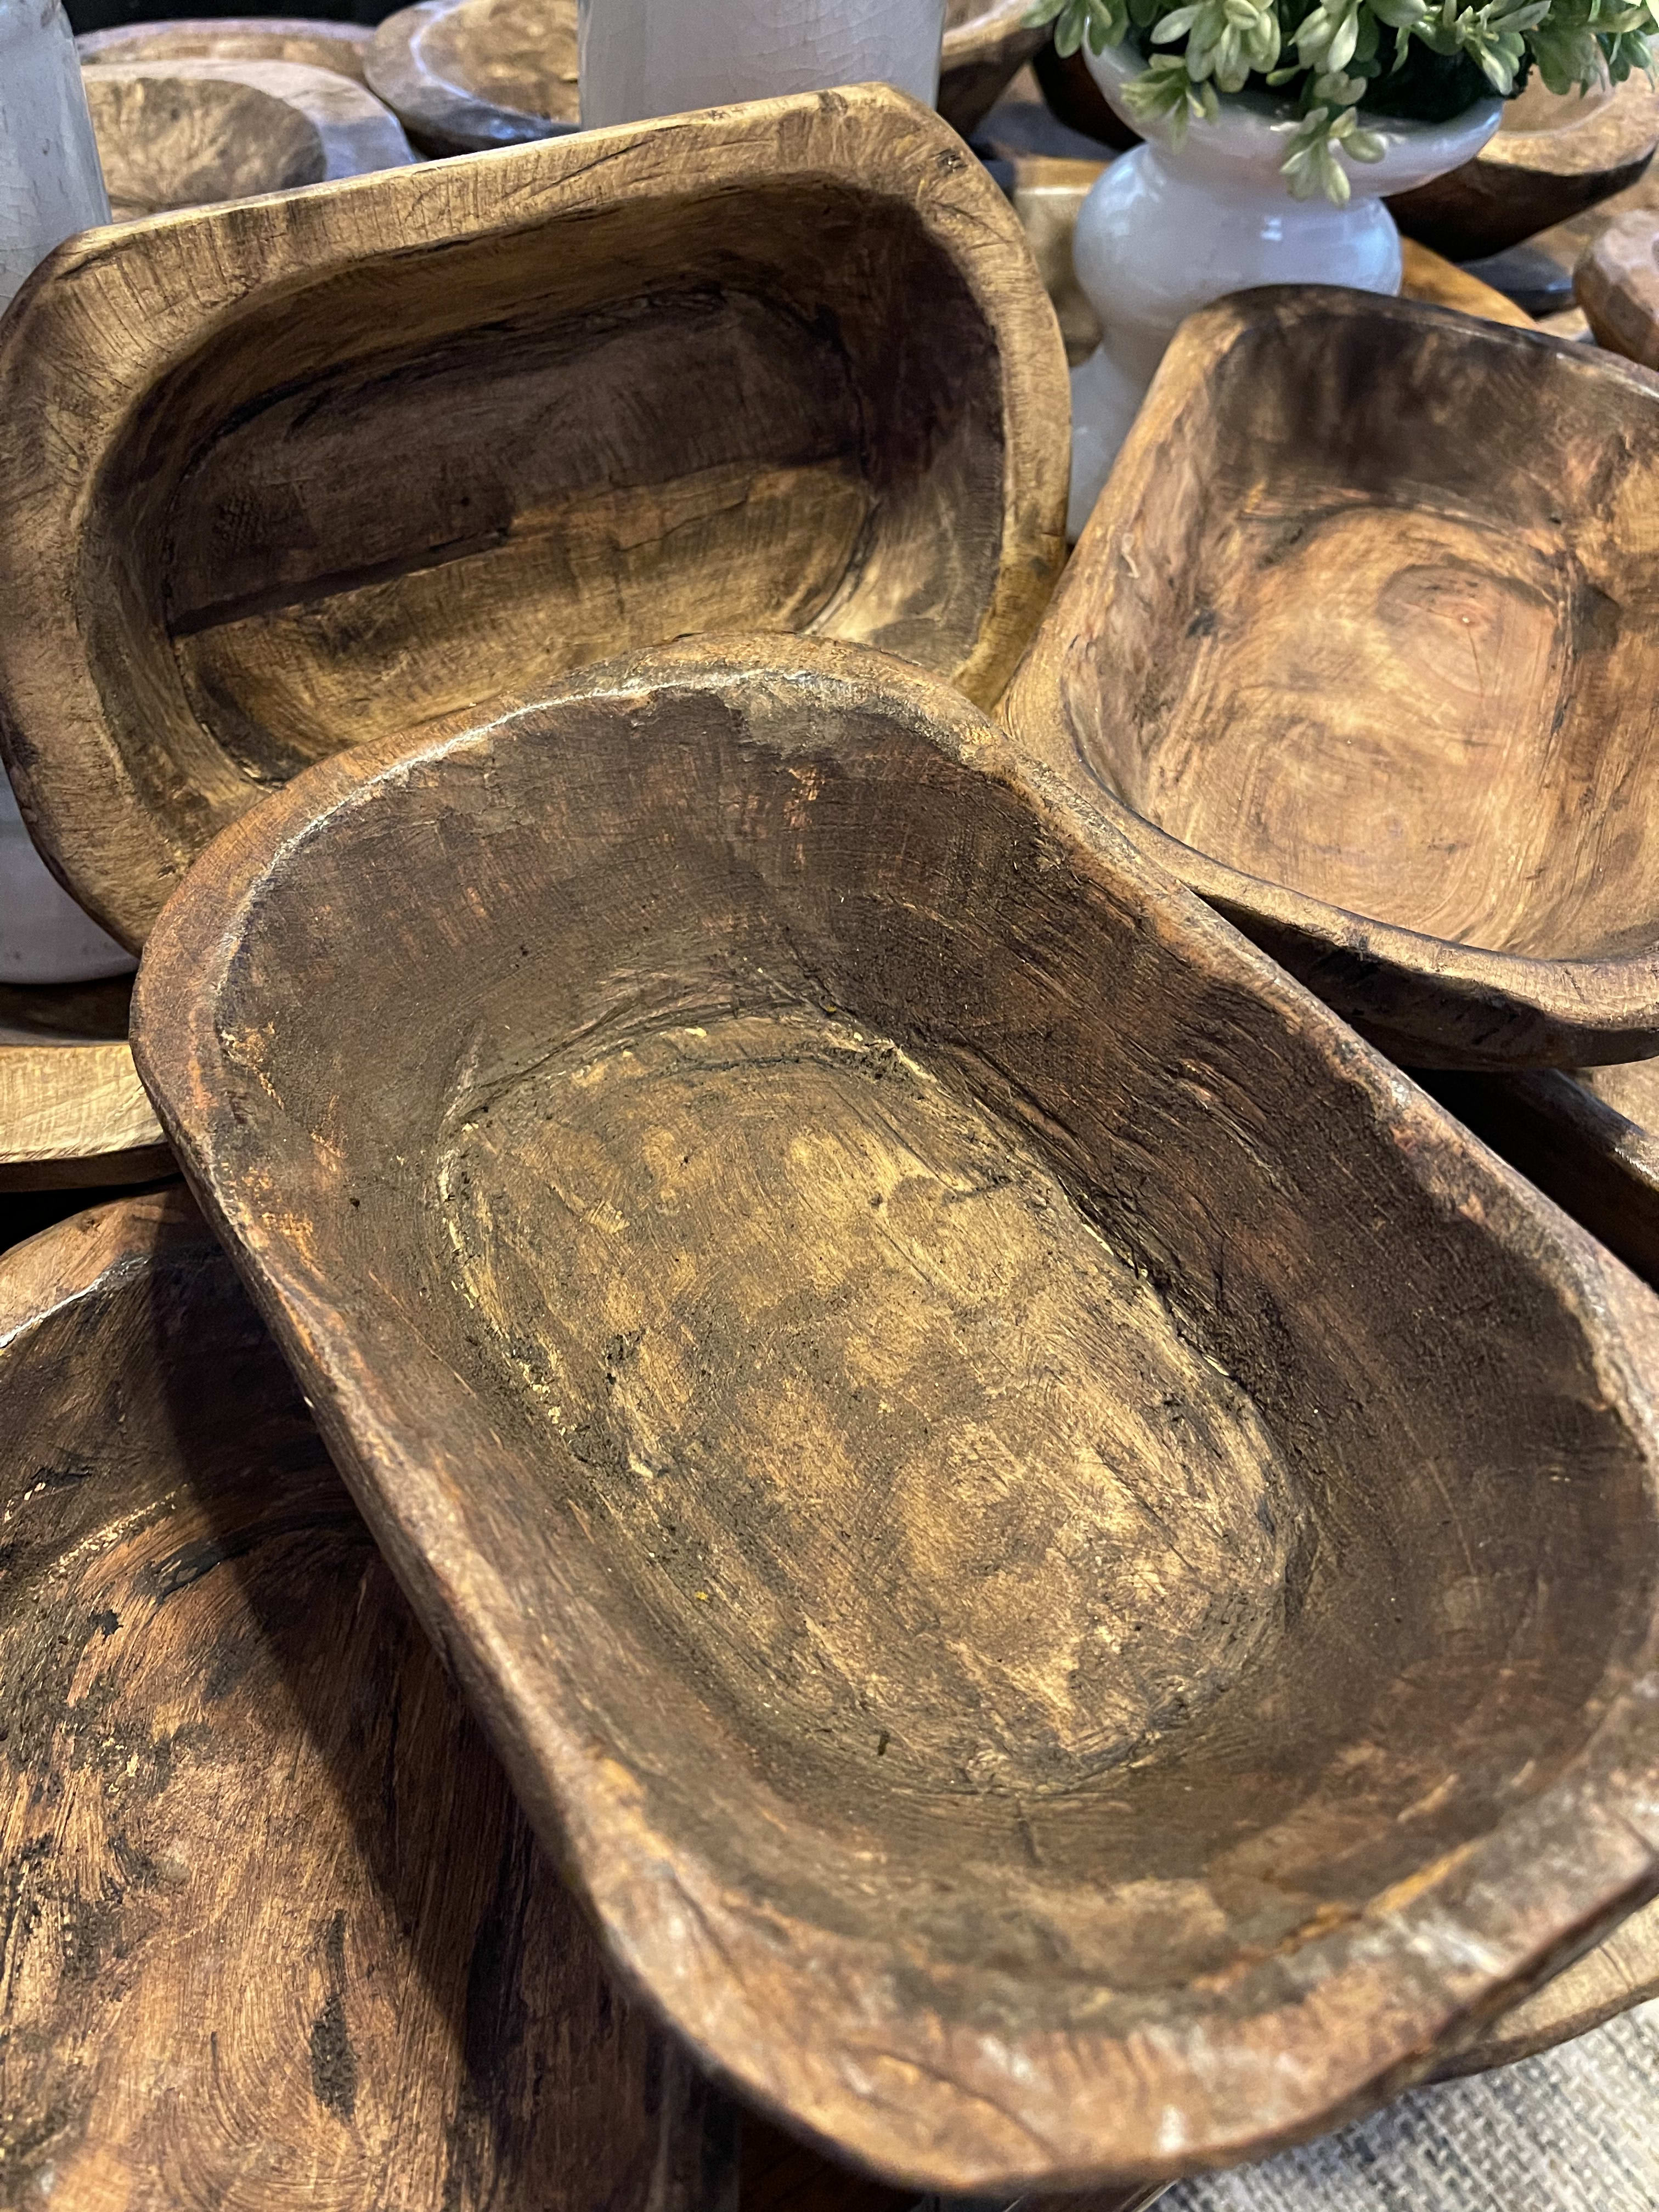 WHOLESALE DOUGH BOWLS are up on the - Big South Market